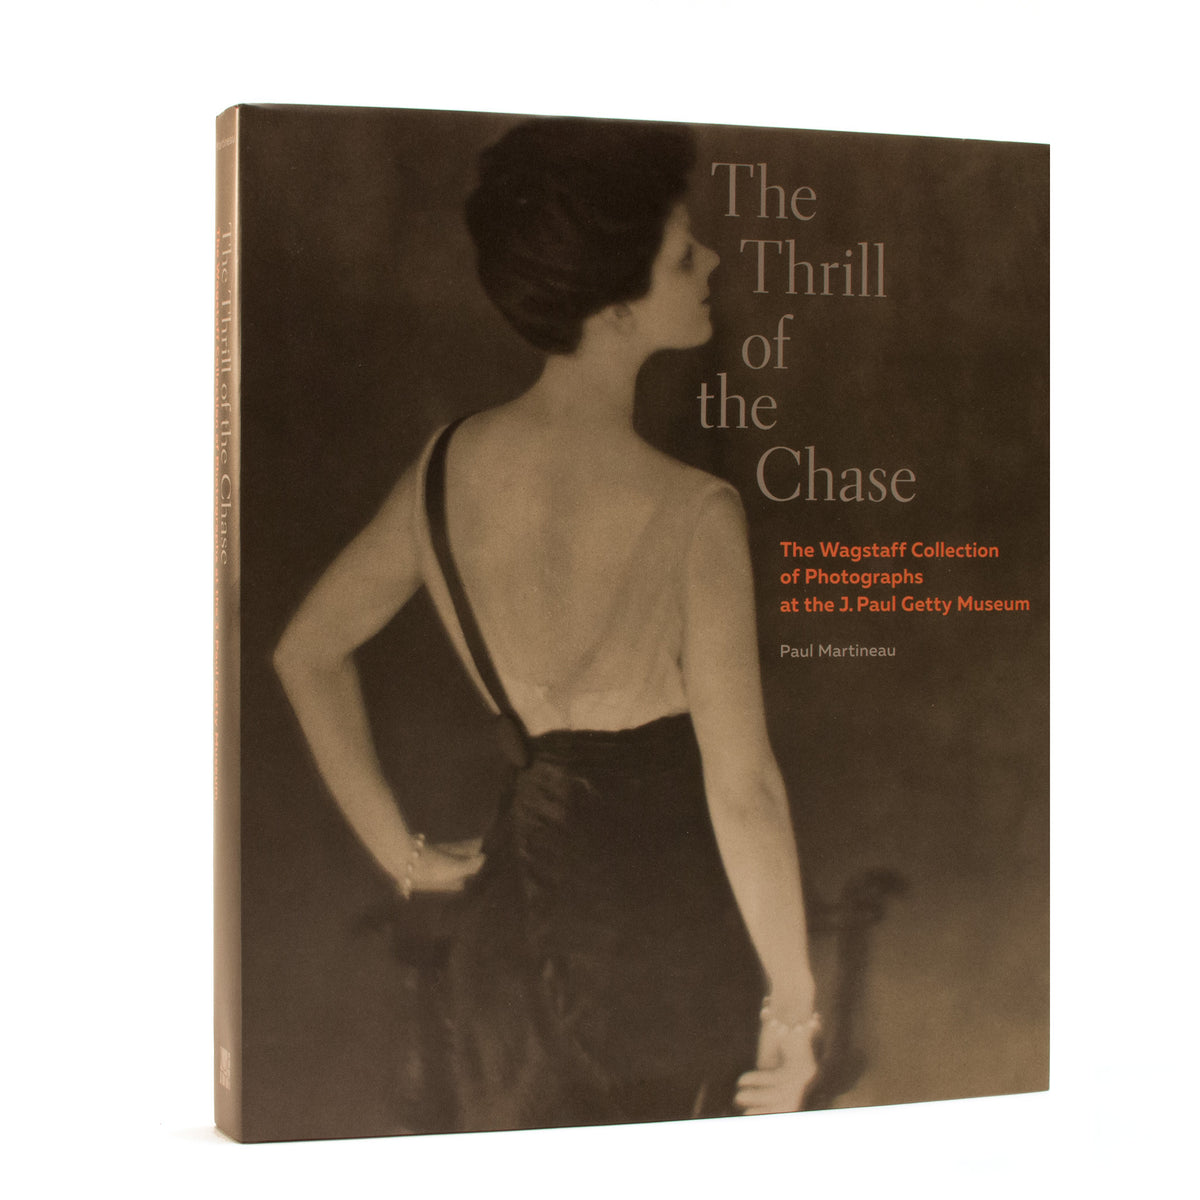 The Thrill of the Chase: The Wagstaff Collection of Photographs at the J. Paul Getty Museum | Getty Store